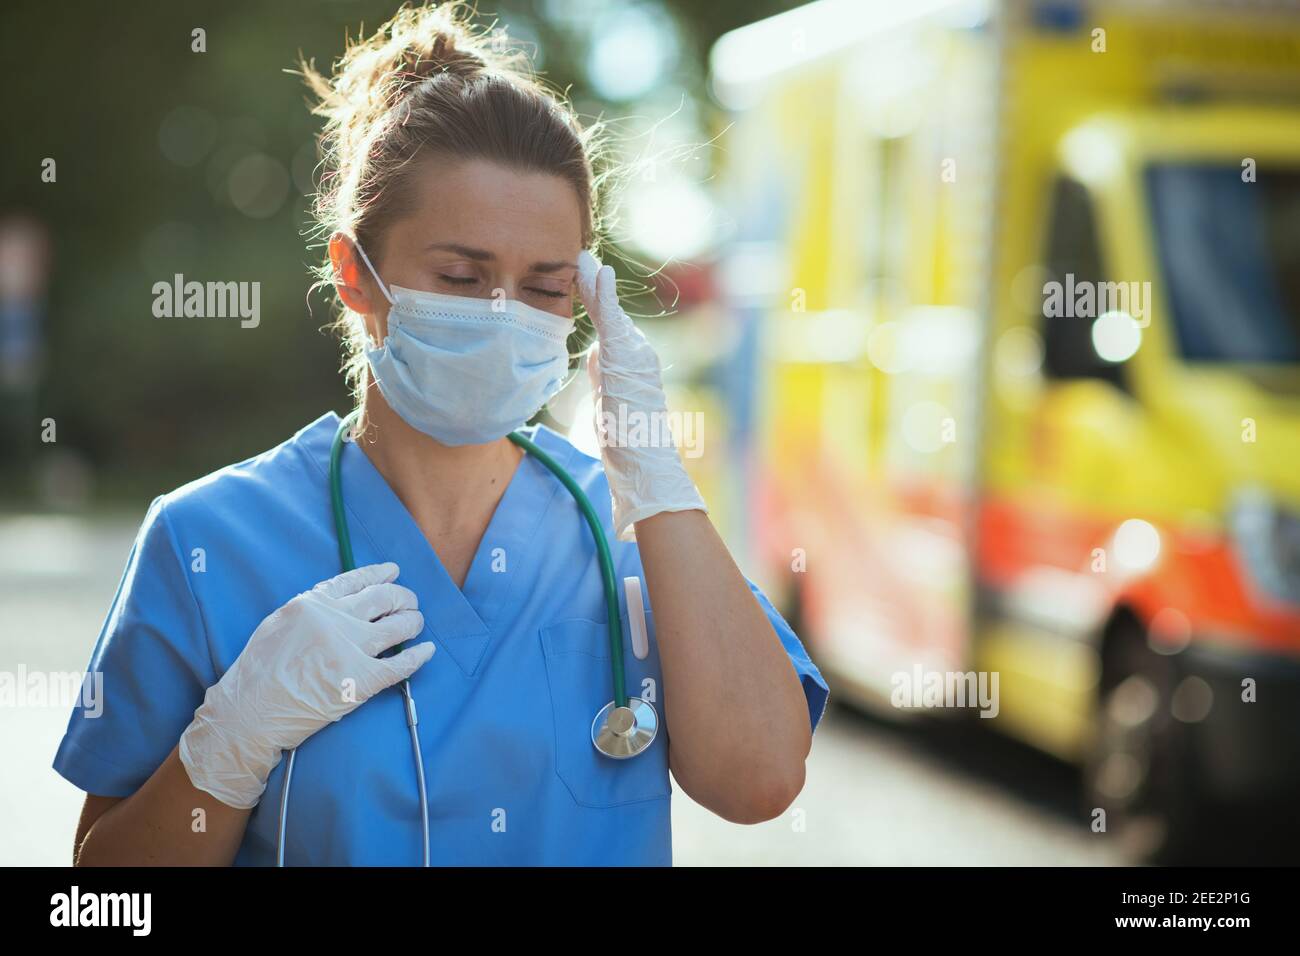 coronavirus pandemic. stressed modern paramedic woman in scrubs with stethoscope and medical mask outdoors near ambulance. Stock Photo